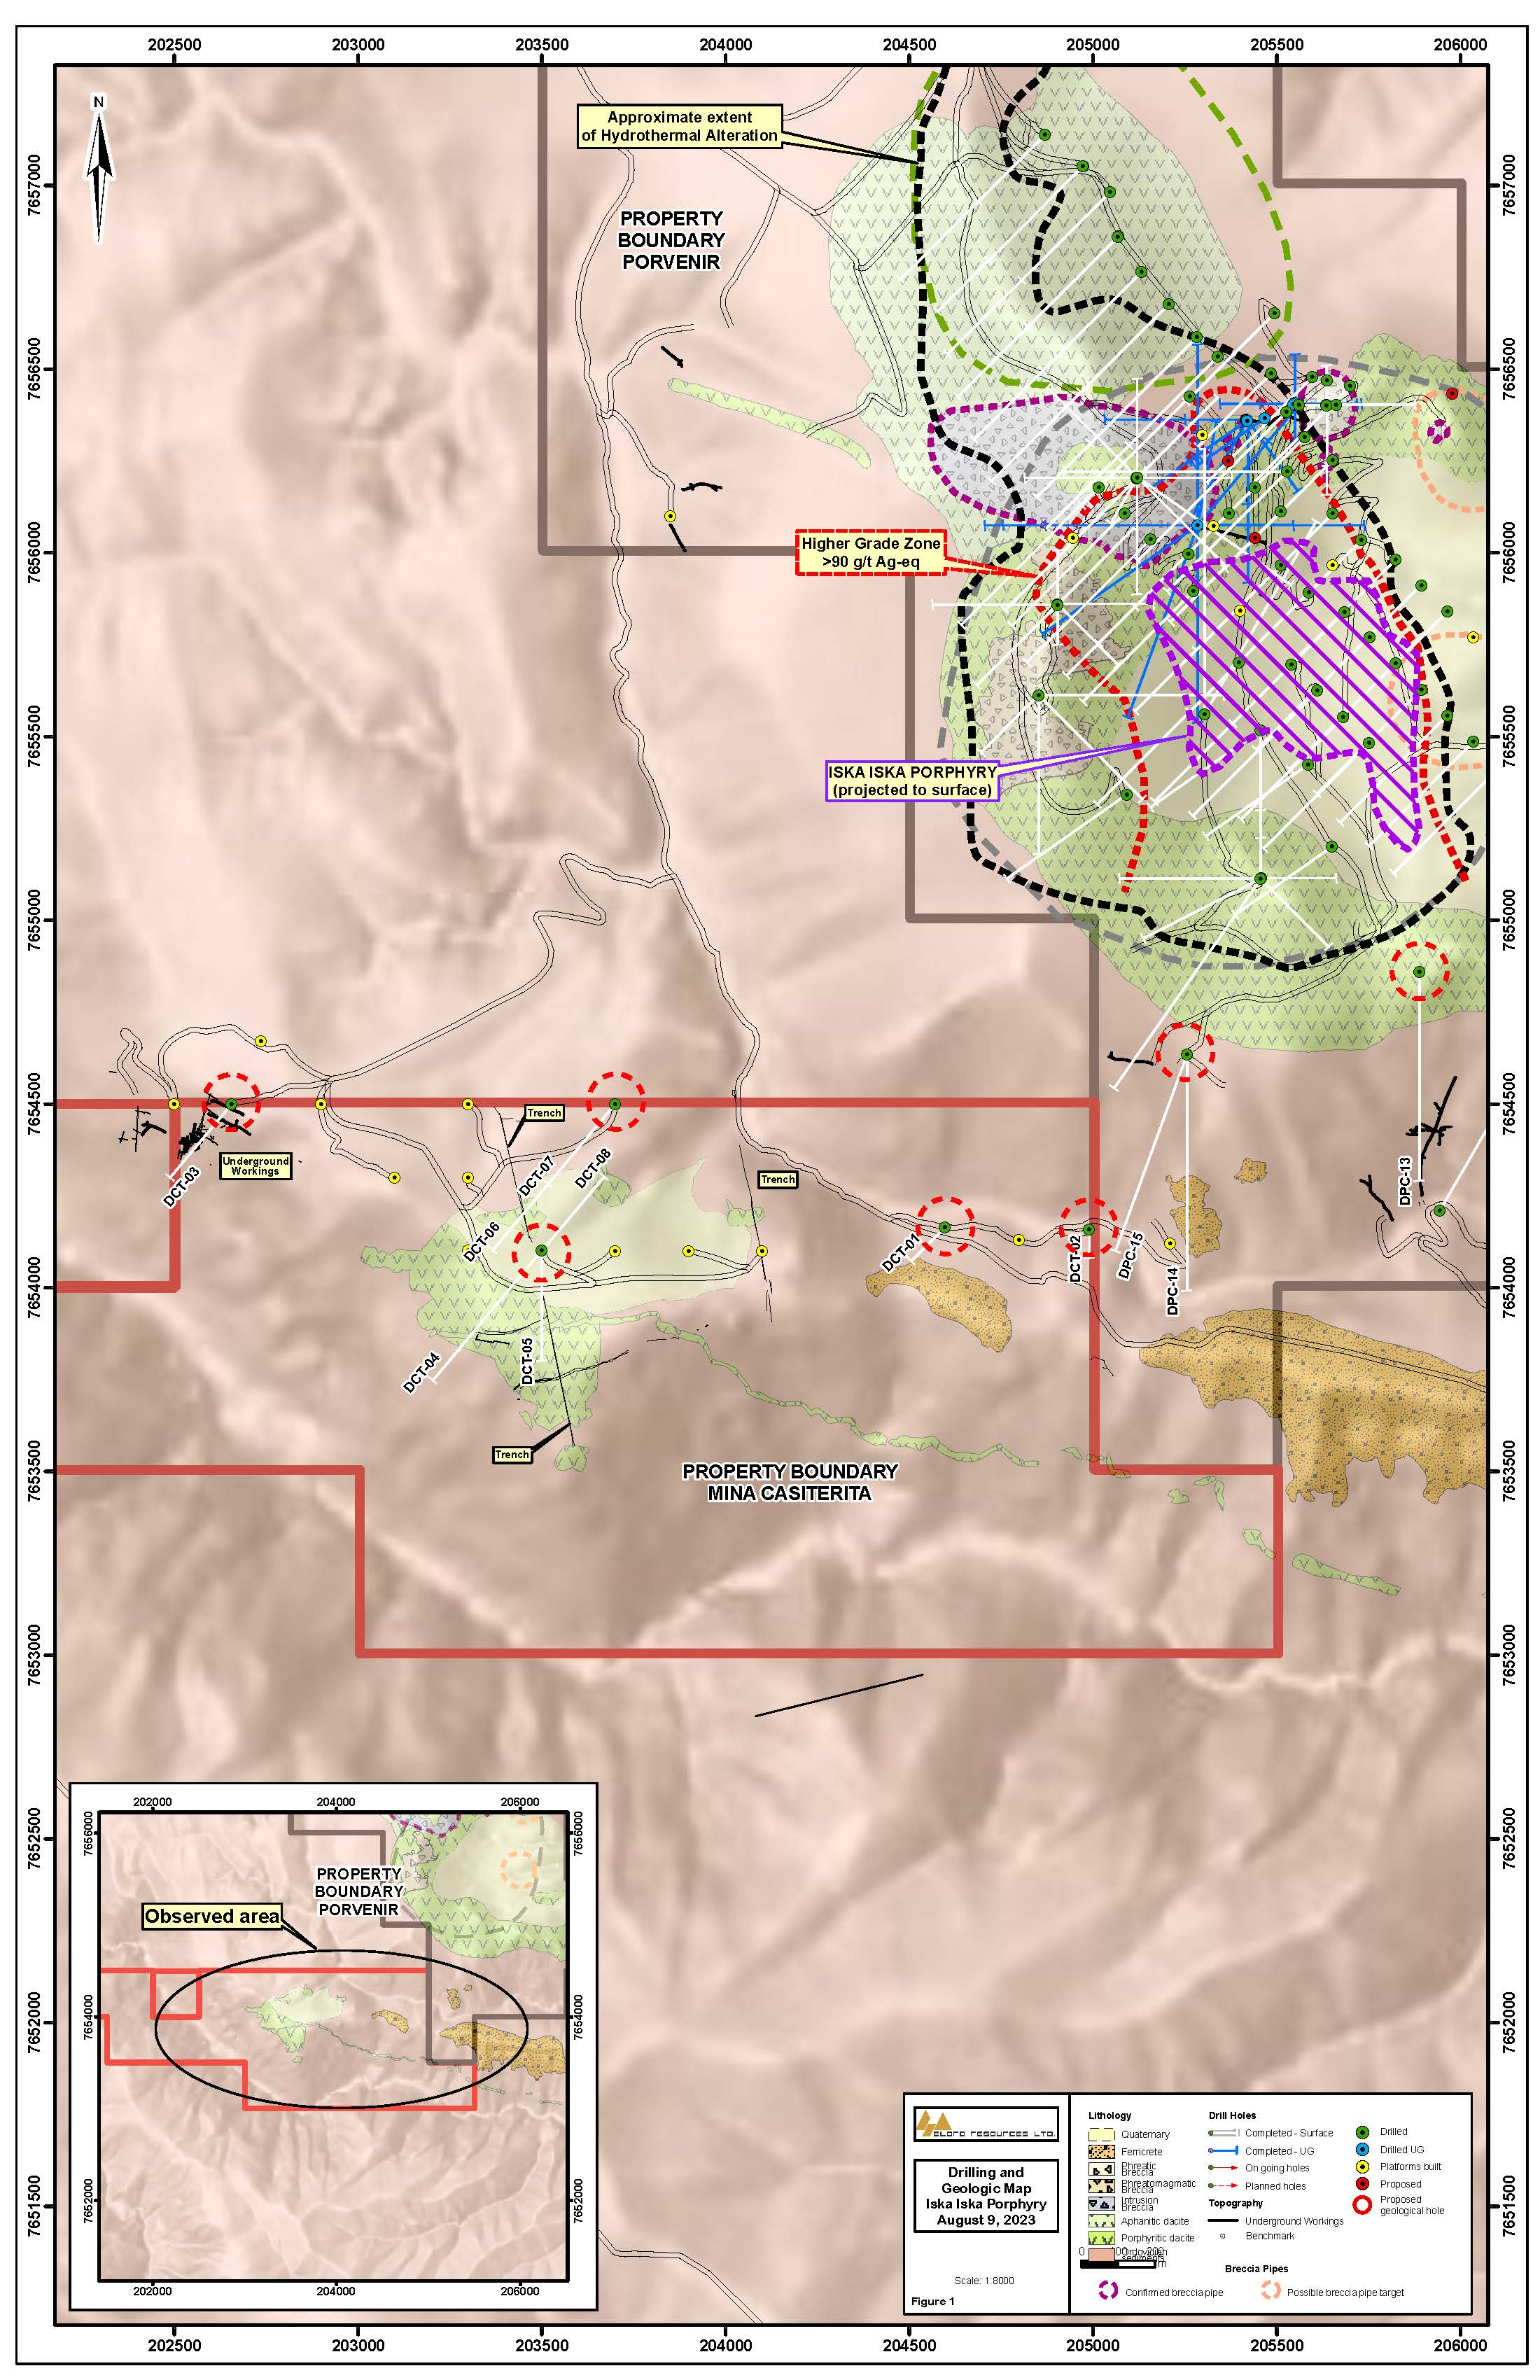 Geological Map of the Mina Casiterita and Porco-Mina 2 Target Areas Showing Locations of Diamond Drill Holes.  Holes reported in this release are highlight in red circles